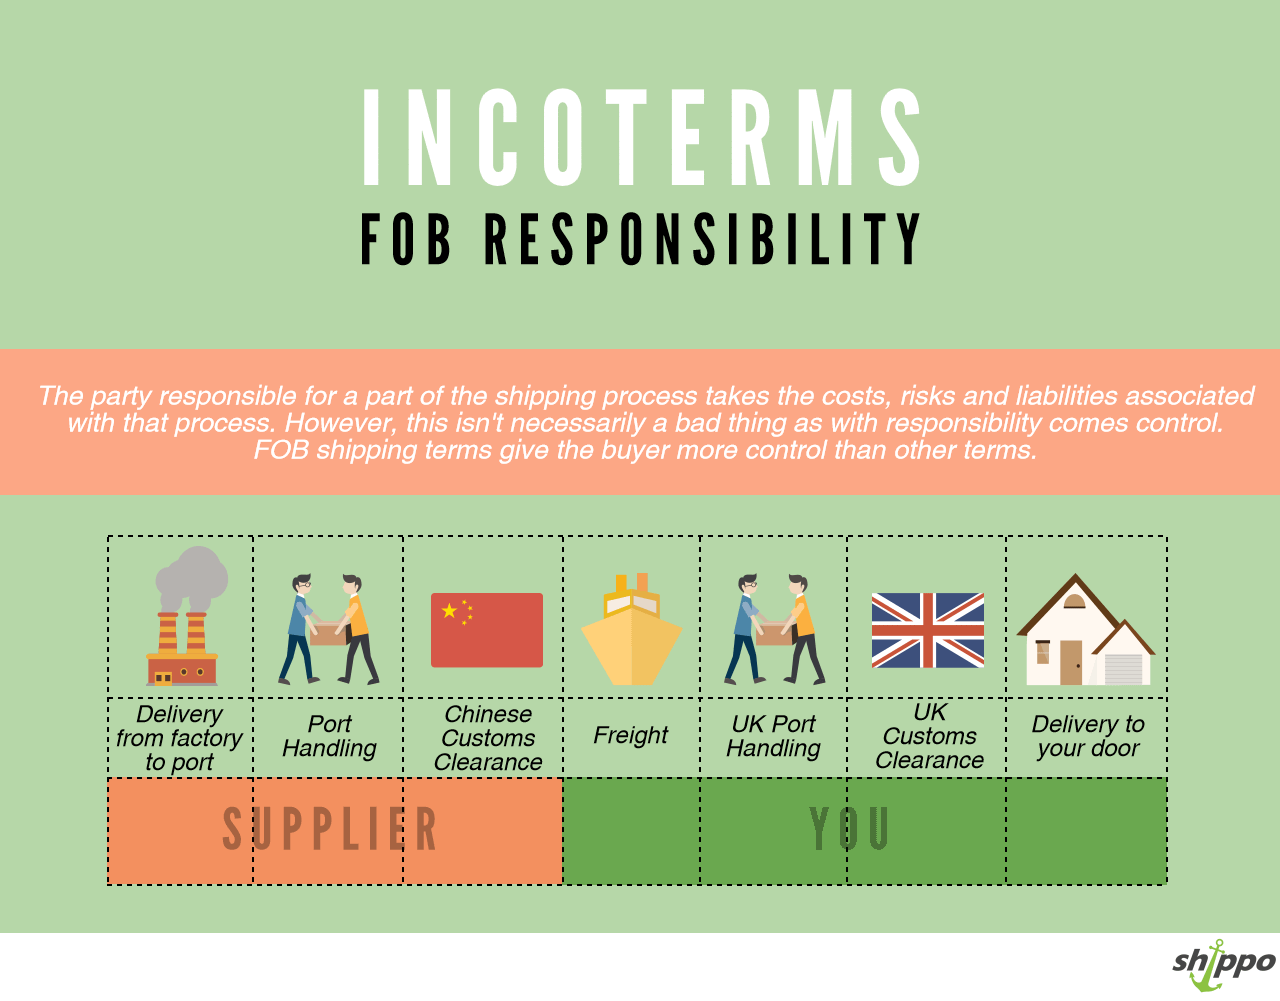 Incoterms Explained: Definition, Examples, Rules, Pros & Cons